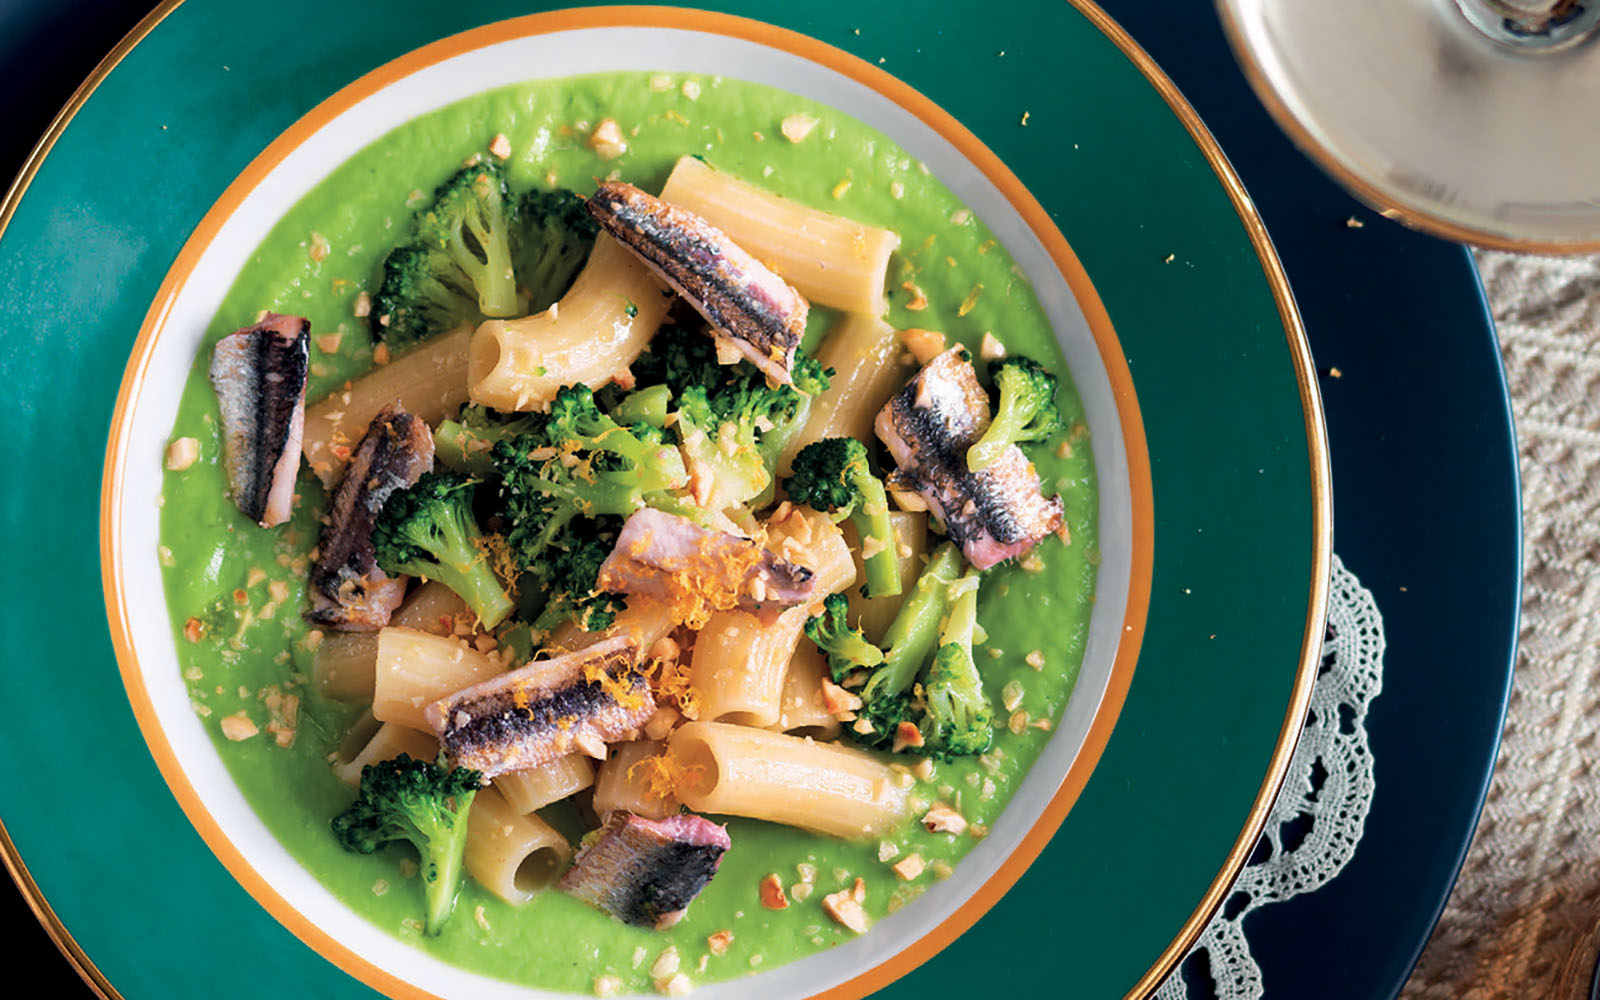 Recipe Pasta and cream of broccoli with anchovies, hazelnuts and grapefruit